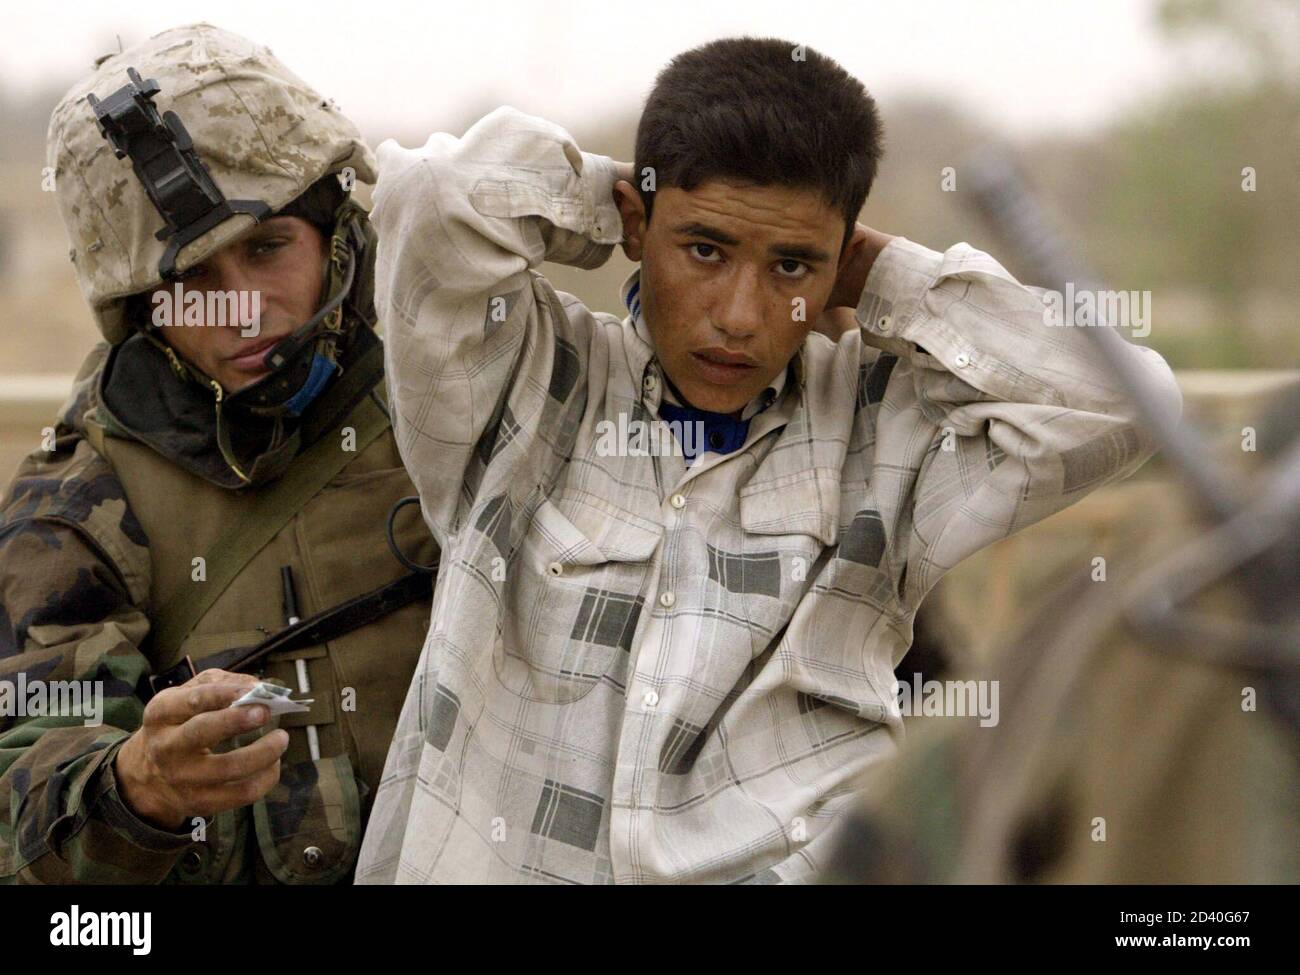 A U.S. Marine from Lima Company, a part of the 7th Marine Regiment, searches a member of the Iraqi Republican guard dressed in civilian clothes for weapons on the New Baghdad highway bridge in the suburbs of the Iraqi capital Baghdad on April 7, 2003.  [U.S. forces burst into the heart of Baghdad on Monday and entered two palace complexes of President Saddam Hussein, but they said the operation was an armoured raid not intended to hold territory.] Stock Photo